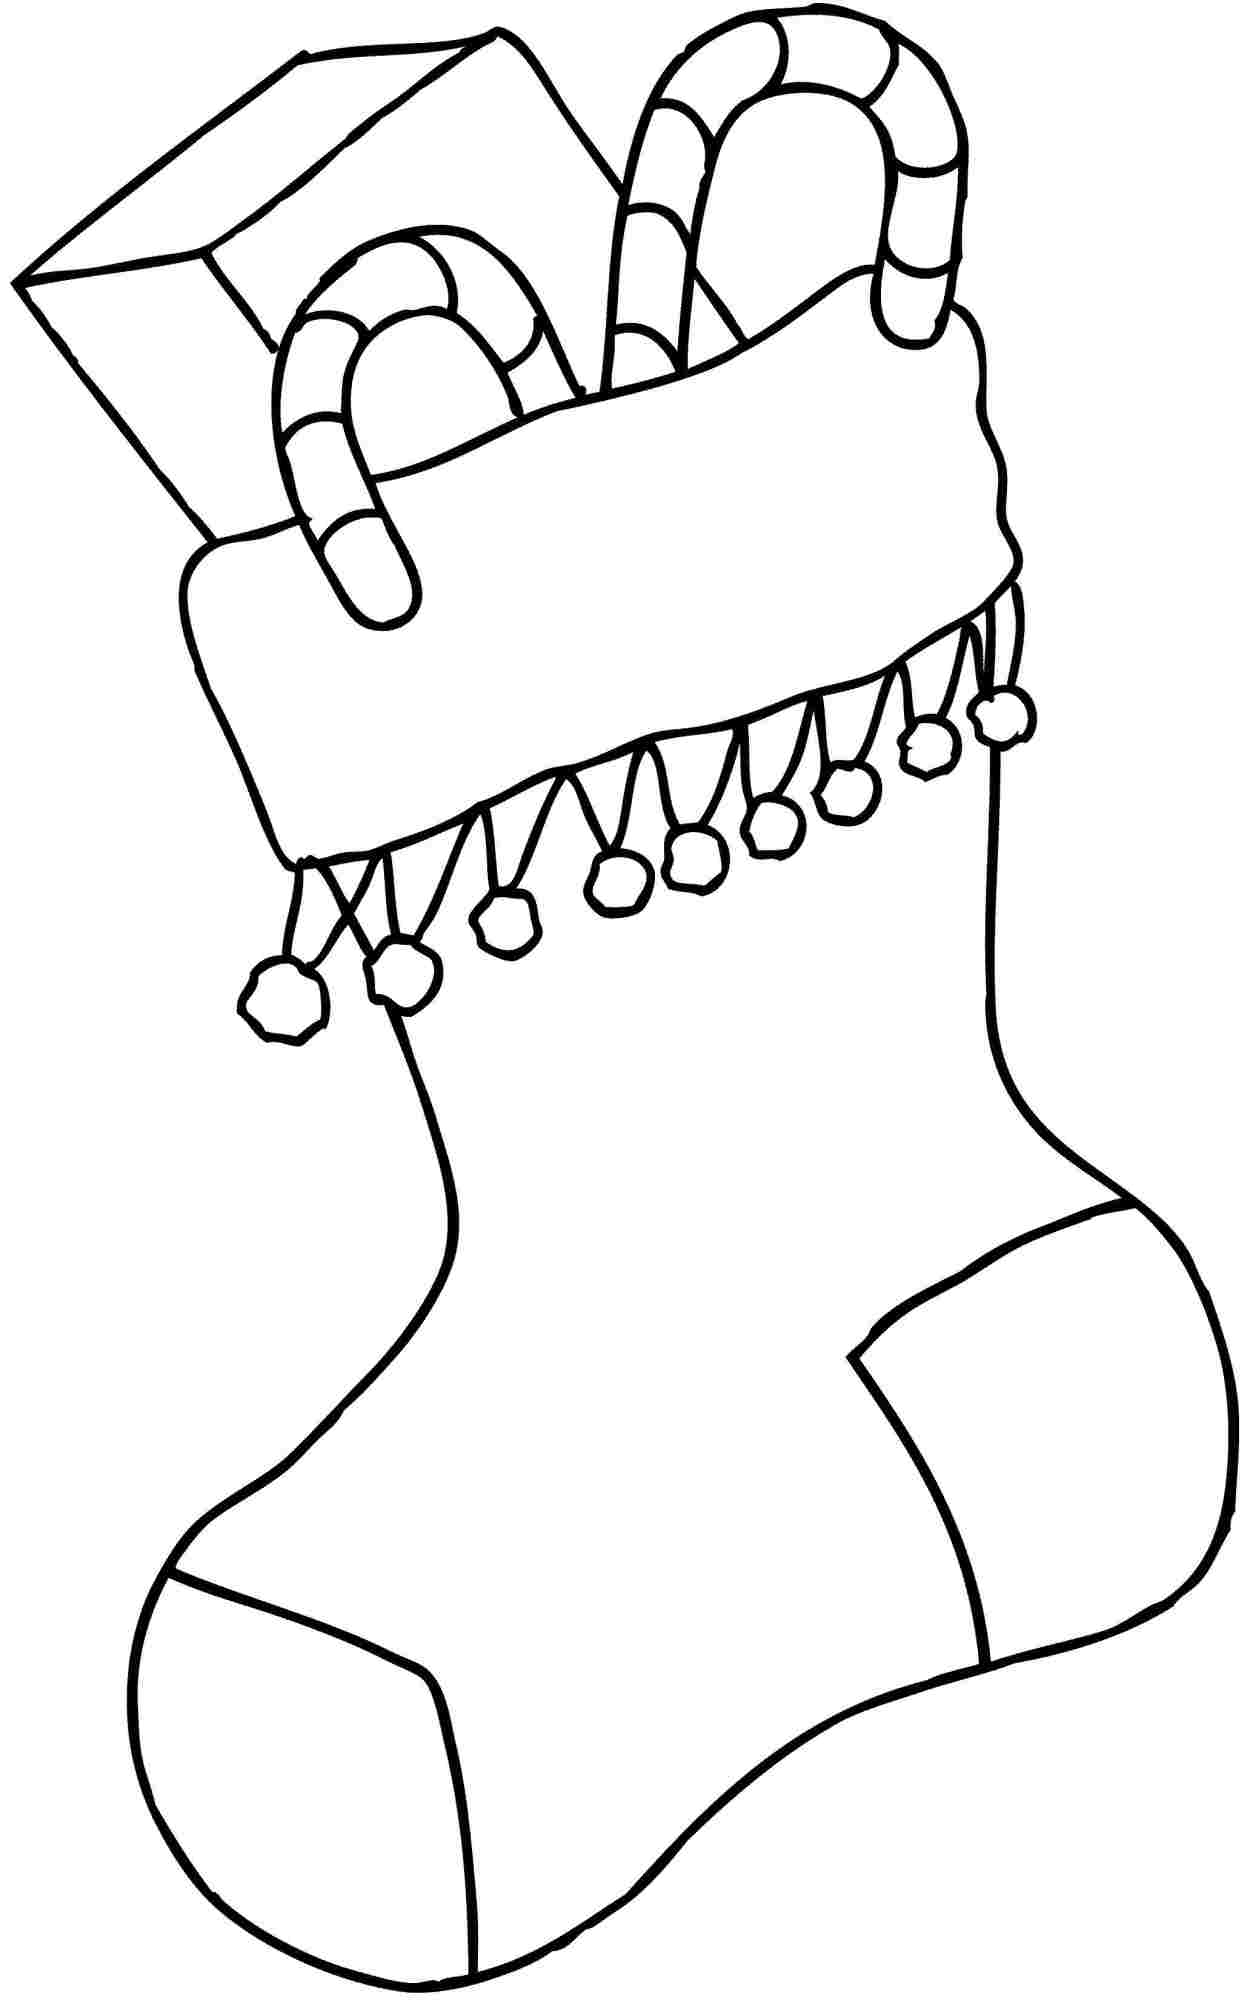 Christmas Stocking Coloring Pages - Best Coloring Pages ...